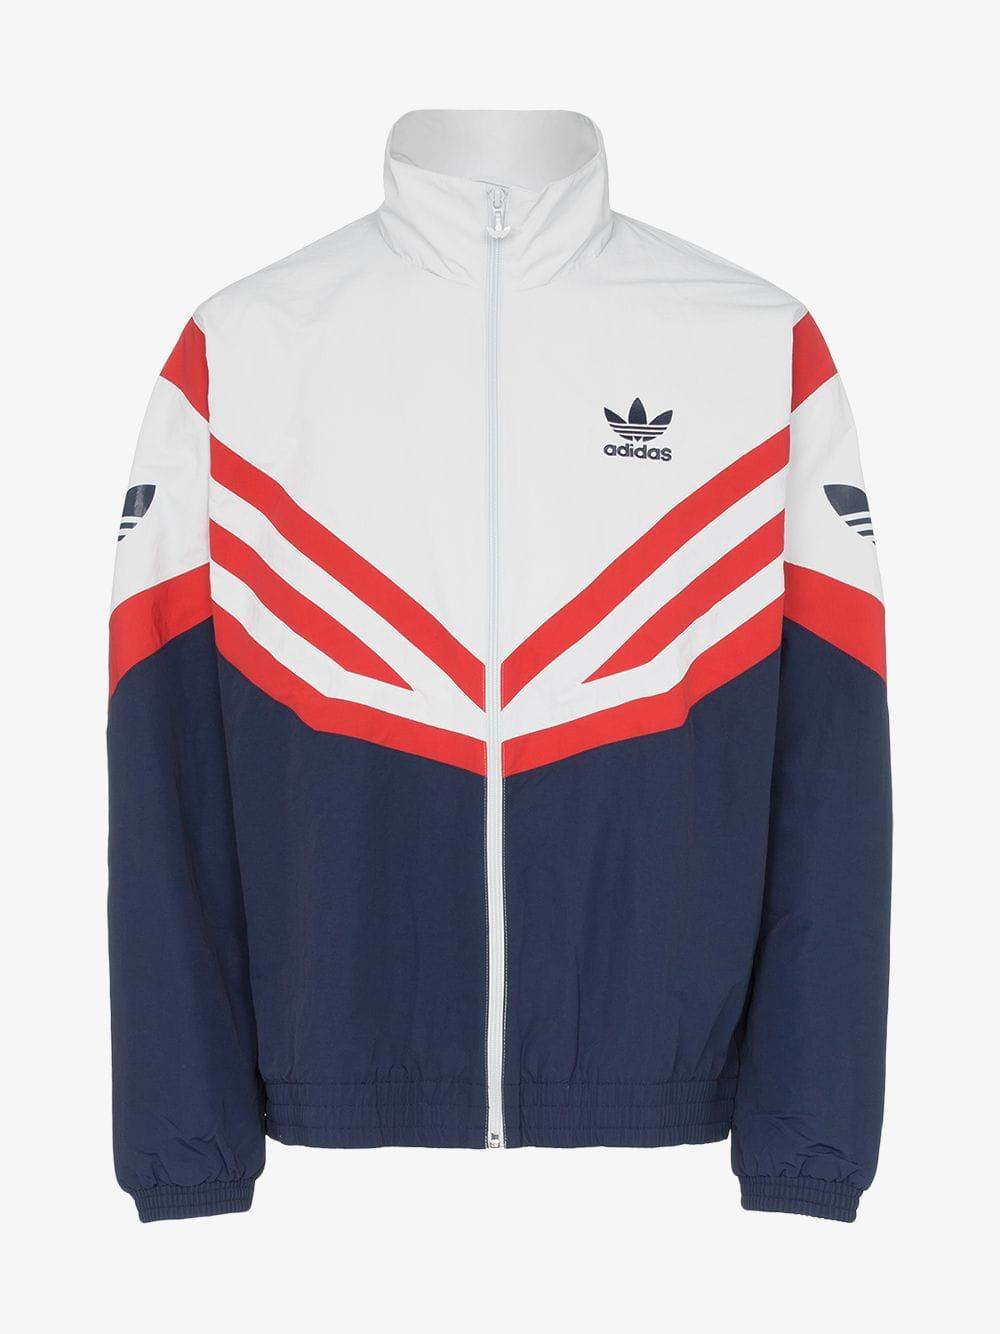 adidas jacket with red stripes